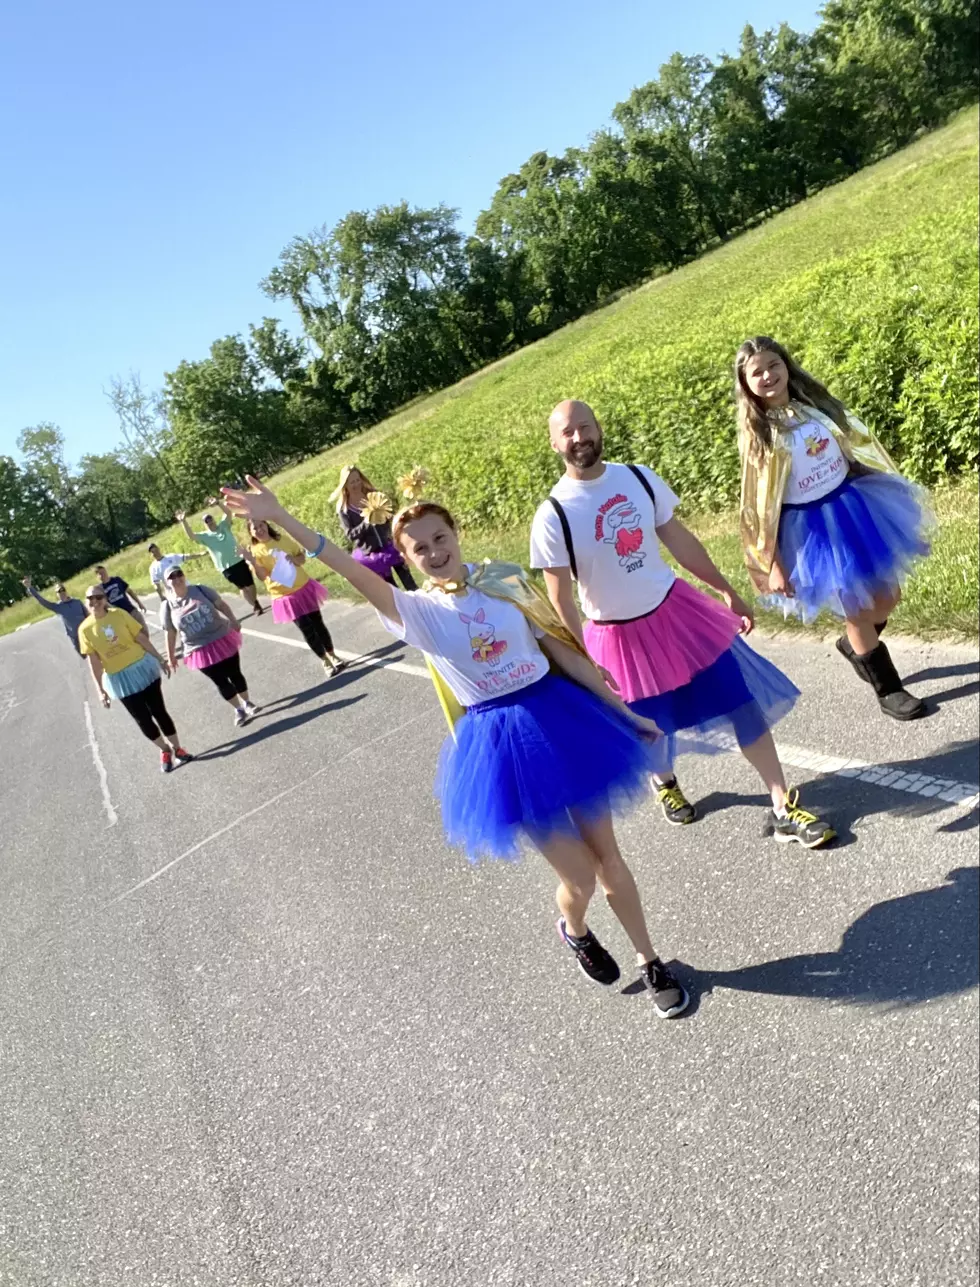 Get your Tutu’s! Middletown, NJ non-profit holding 5K to raise funds for pediatric cancer research